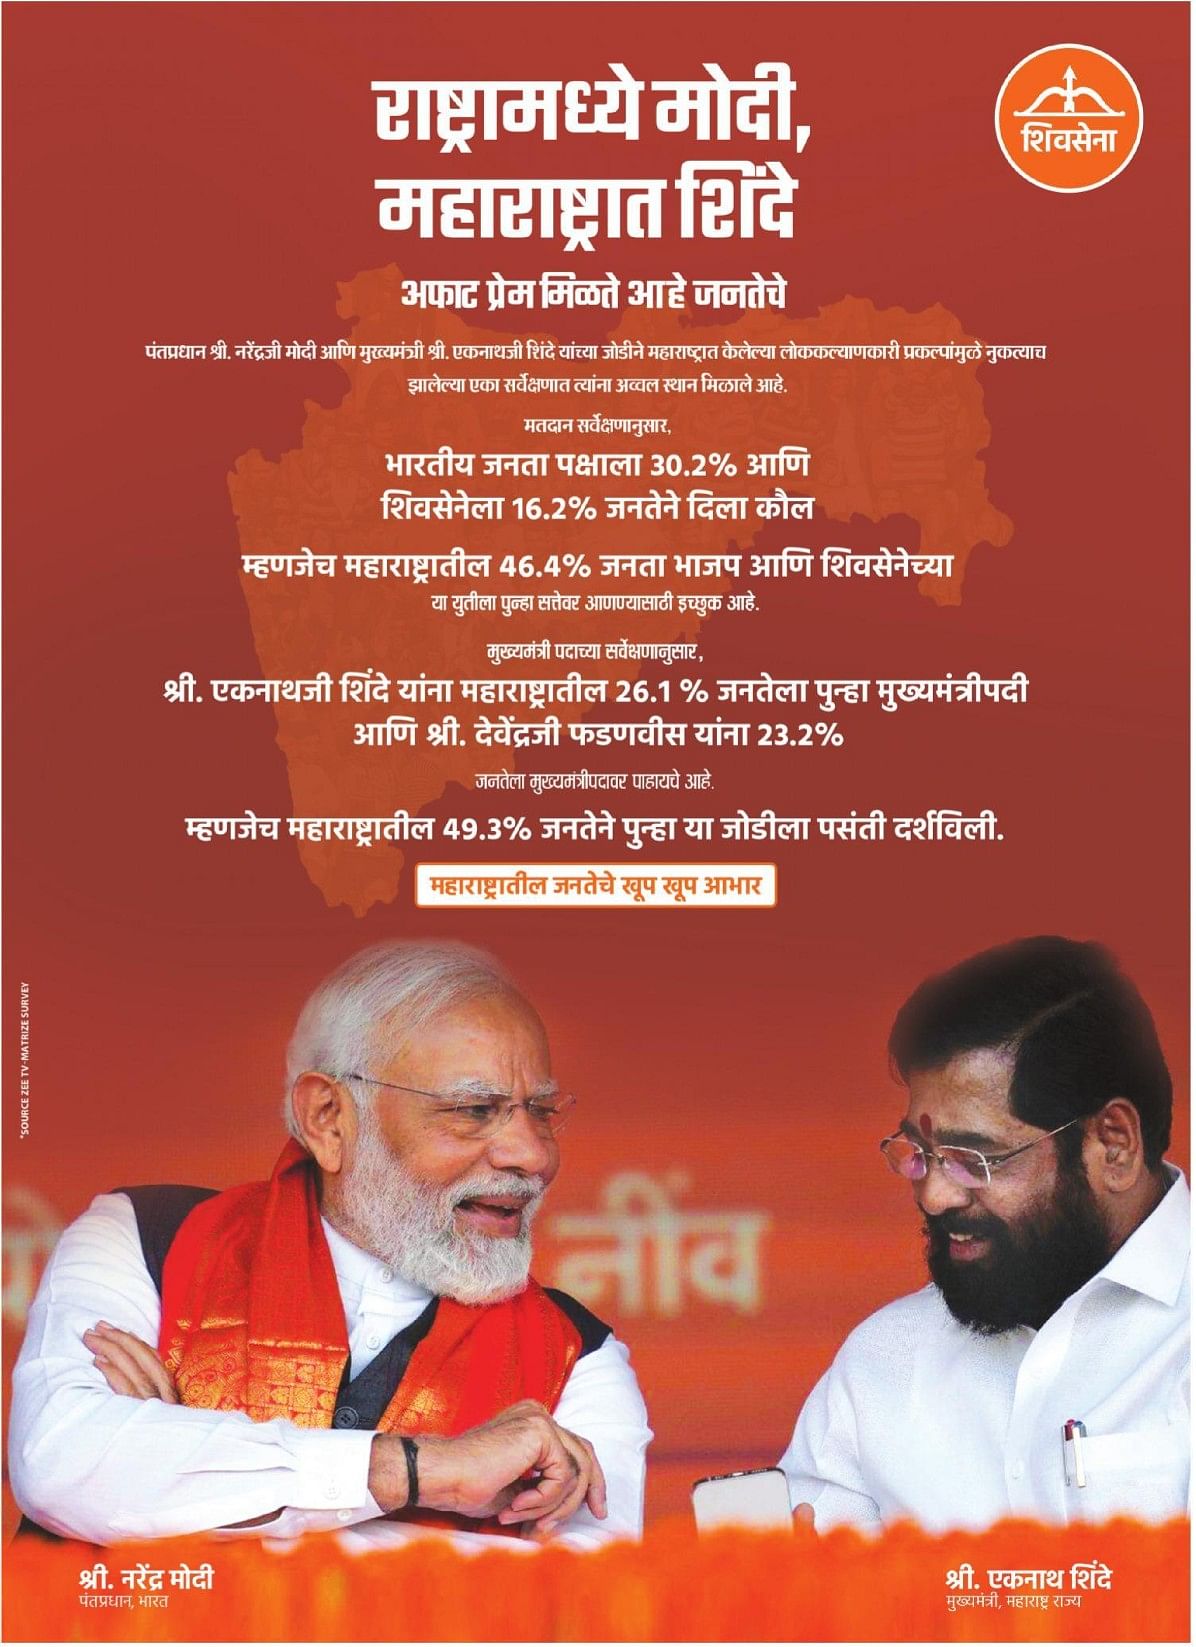 After the controversy over the ad, Shiv Sena had to issue another ad on Wednesday portraying unity of the alliance.